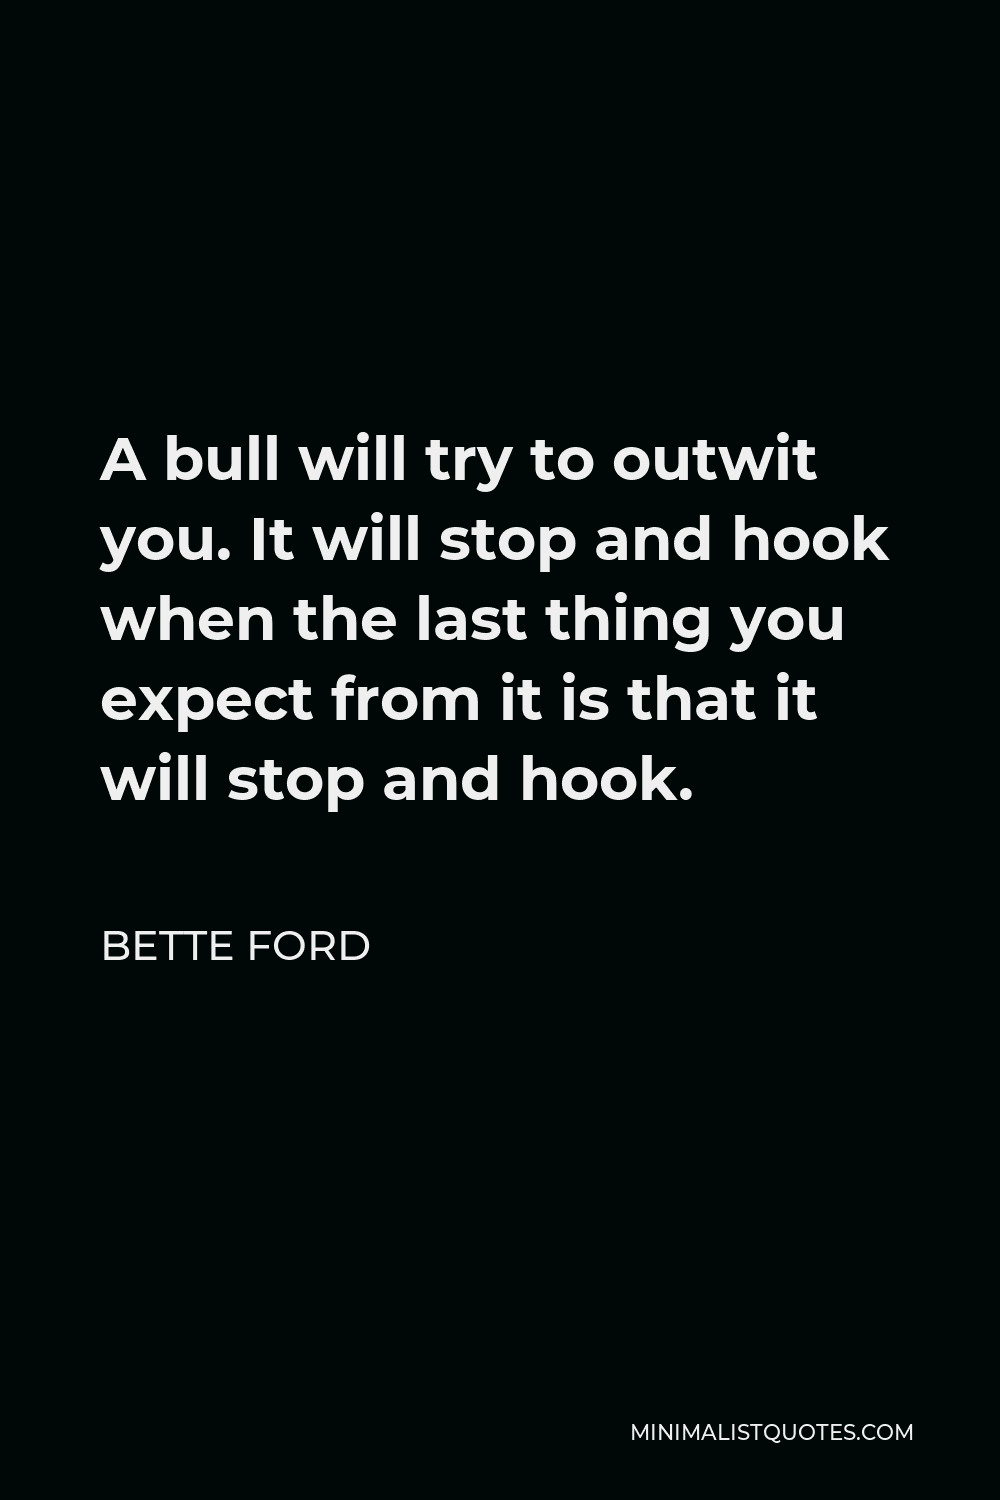 Bette Ford Quote - A bull will try to outwit you. It will stop and hook when the last thing you expect from it is that it will stop and hook.